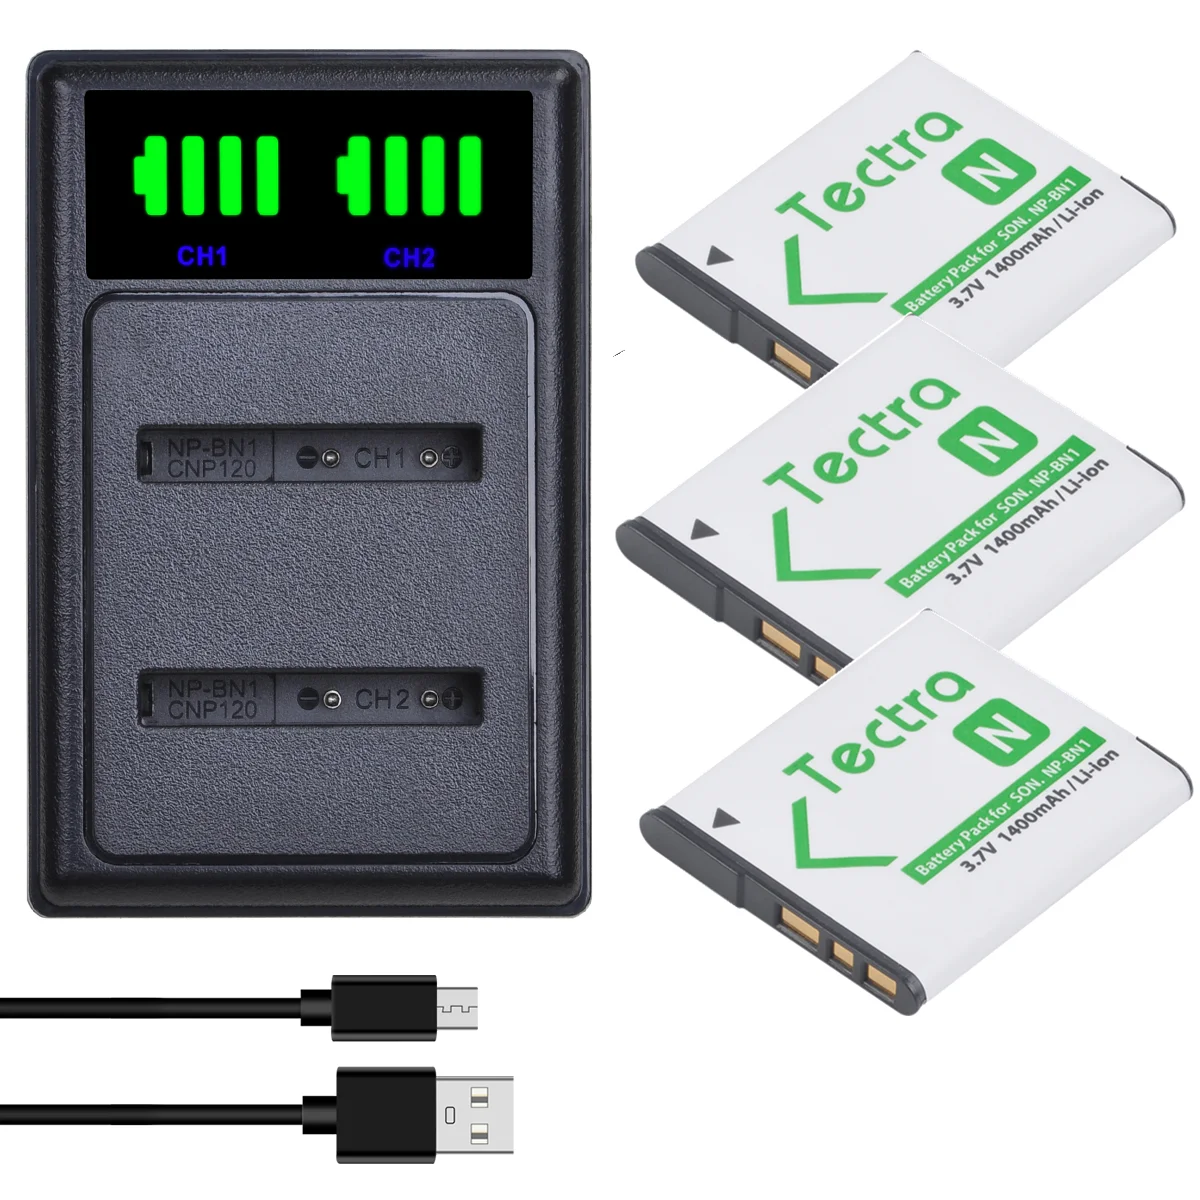 

NP-BN1 NP BN1 NPBN1 Battery Charger Kits for Sony DSC TX9 WX5 WX100 TX7 TX5 WX5C W390 W380 W350 W320 W360 QX100 Battery NP-BN1